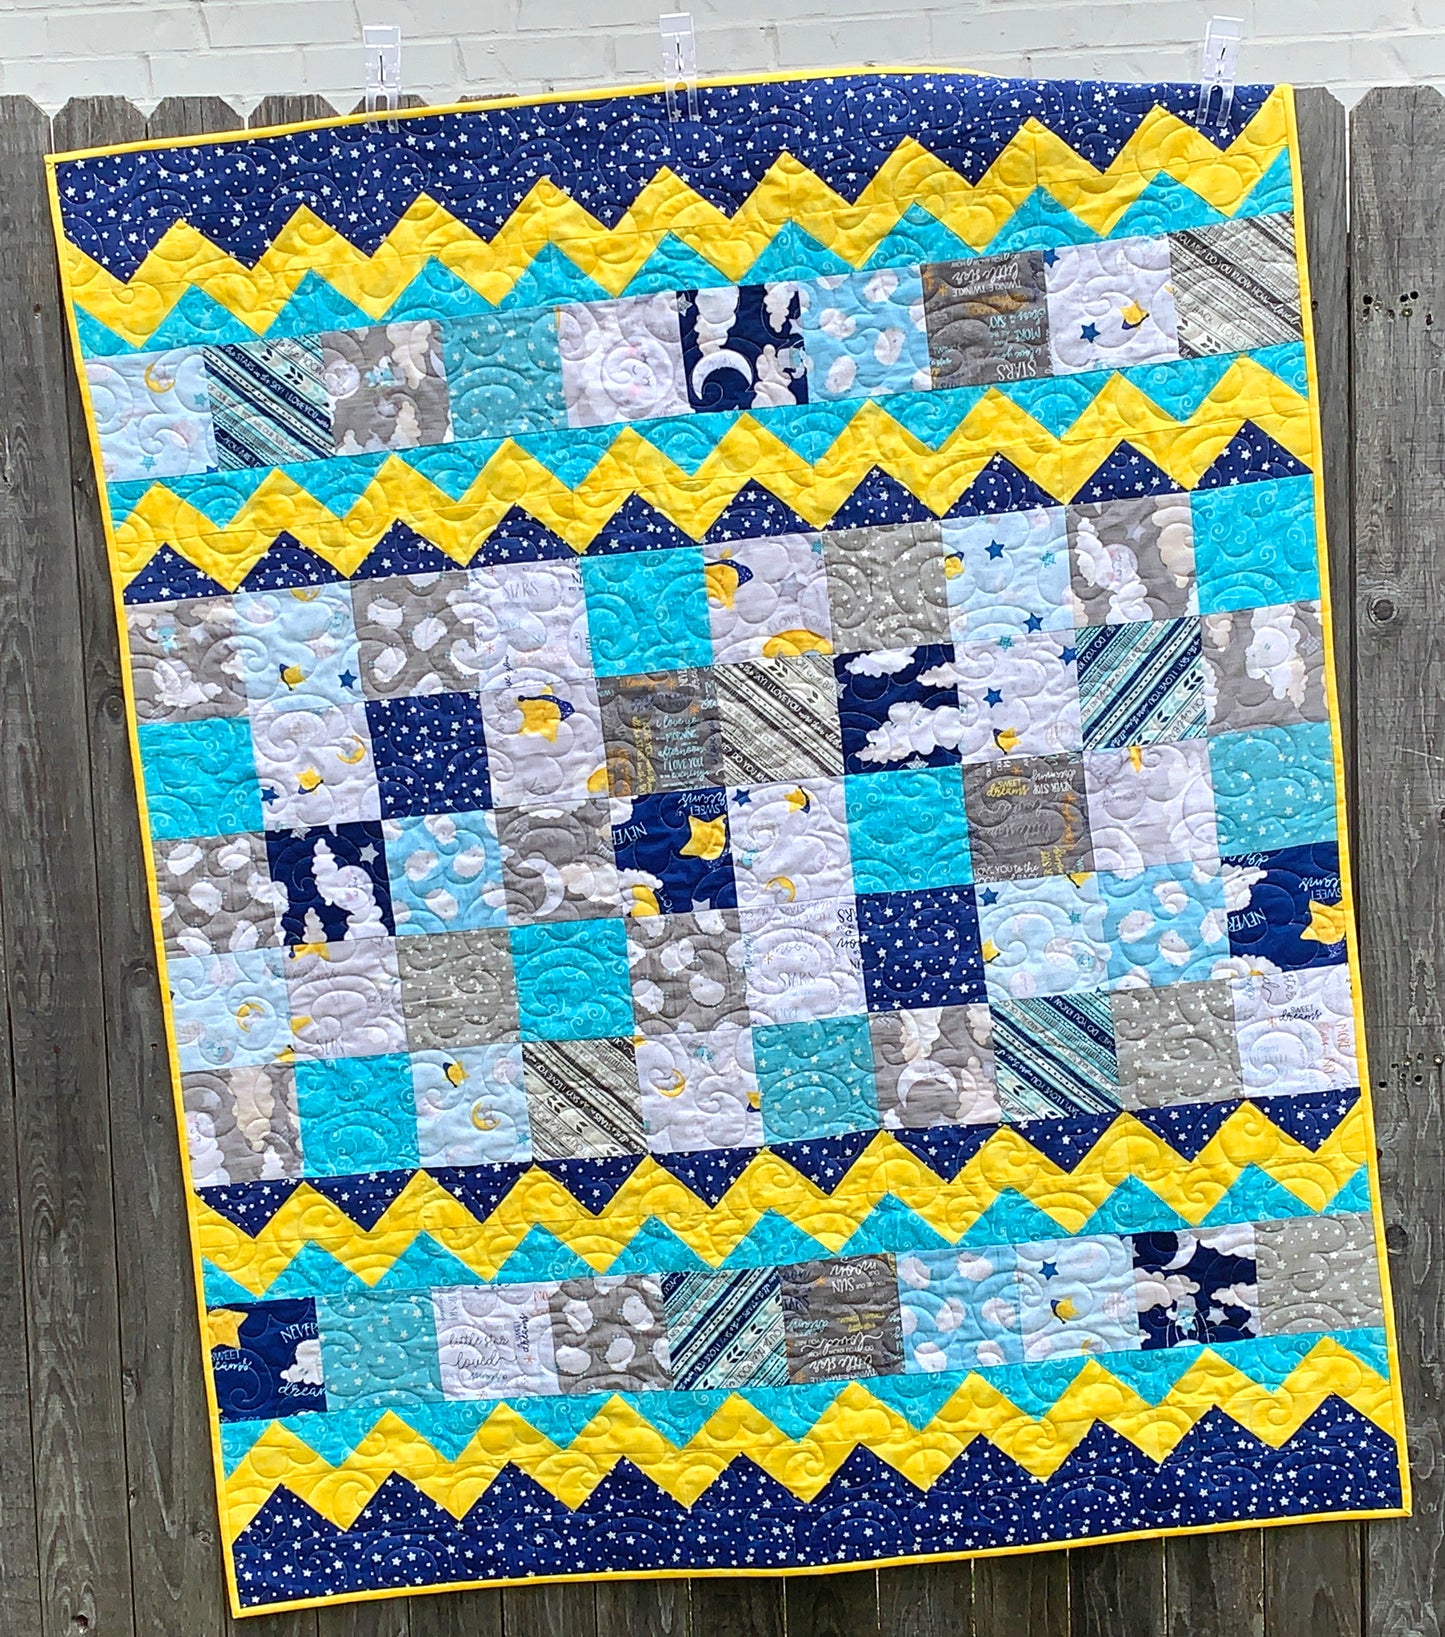 Baby Blocks charm square baby quilt pattern with yellow top and bottom zig-zag rows that look like rick-rack with rows of patchwork squares in between. Quilt is trimmed in blue and yellow and is shown displayed on a fence.